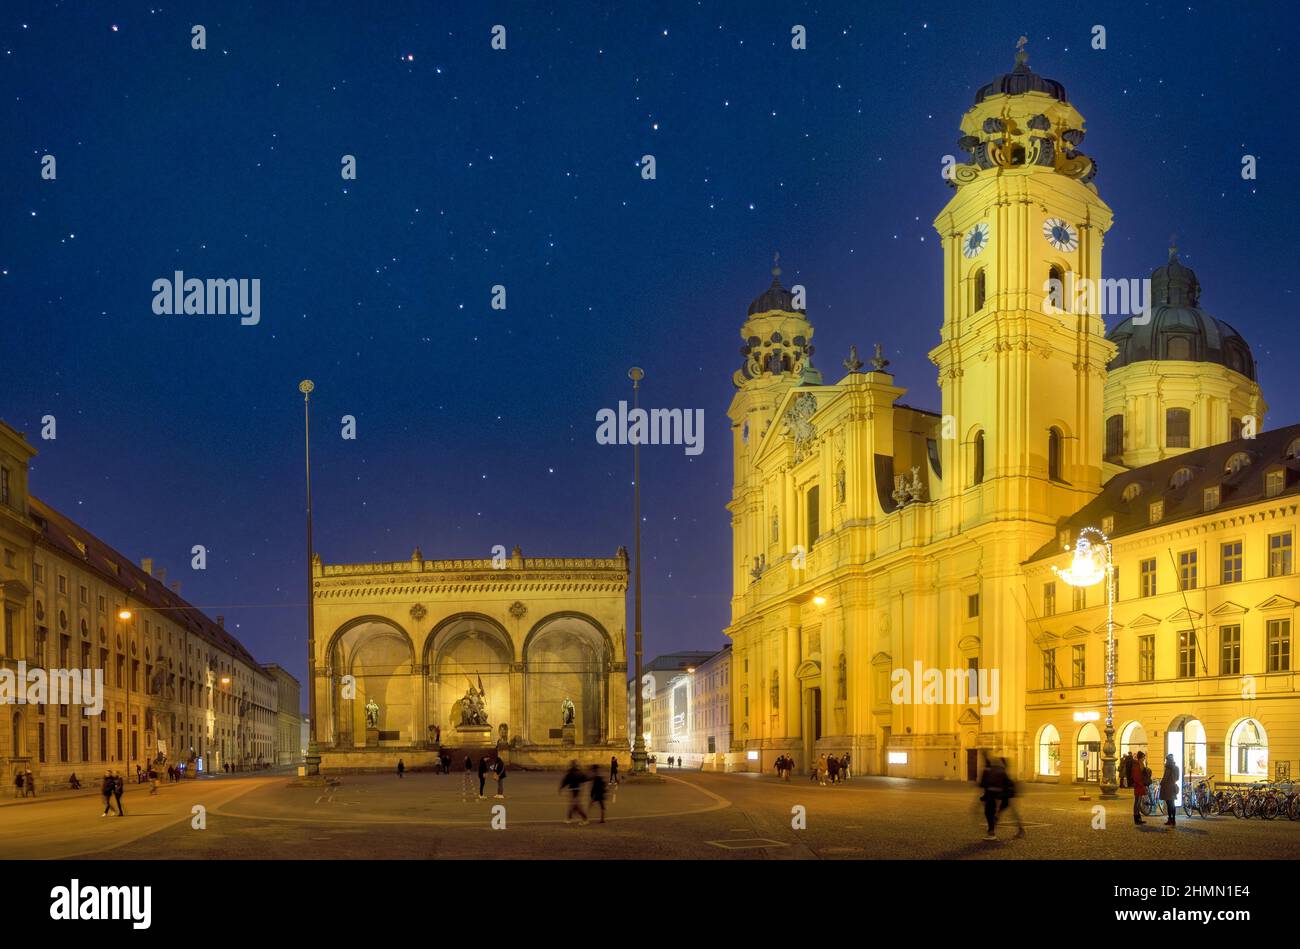 Feldherrnhalle (Field Marshals' Hall) with Theatine Church at Odeon Square at night (composing), Germany, Bavaria, Muenchen Stock Photo